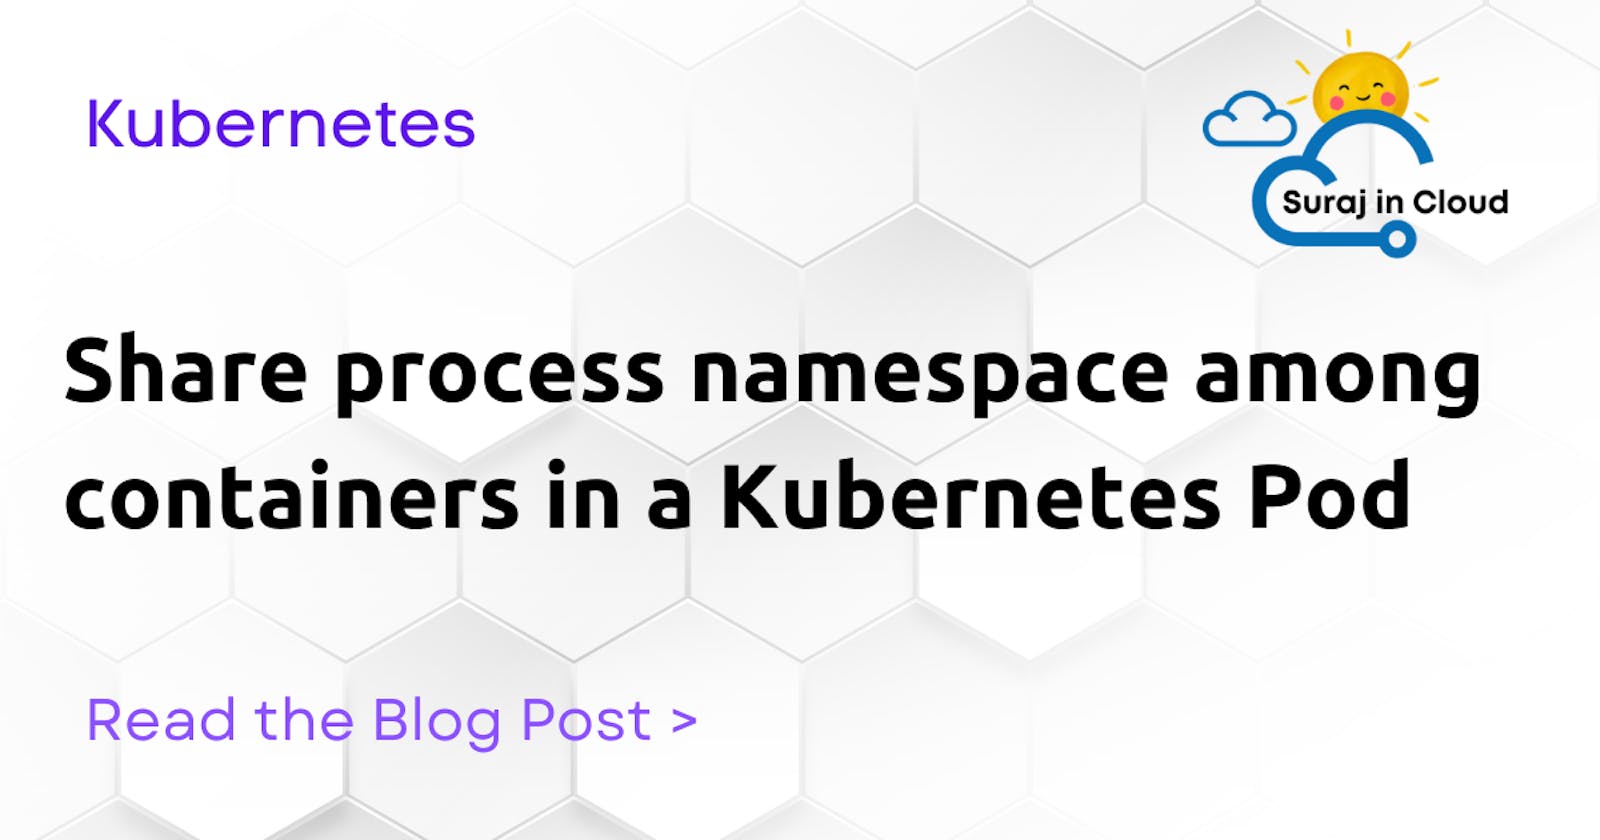 How to share process namespace among containers in a Kubernetes Pod